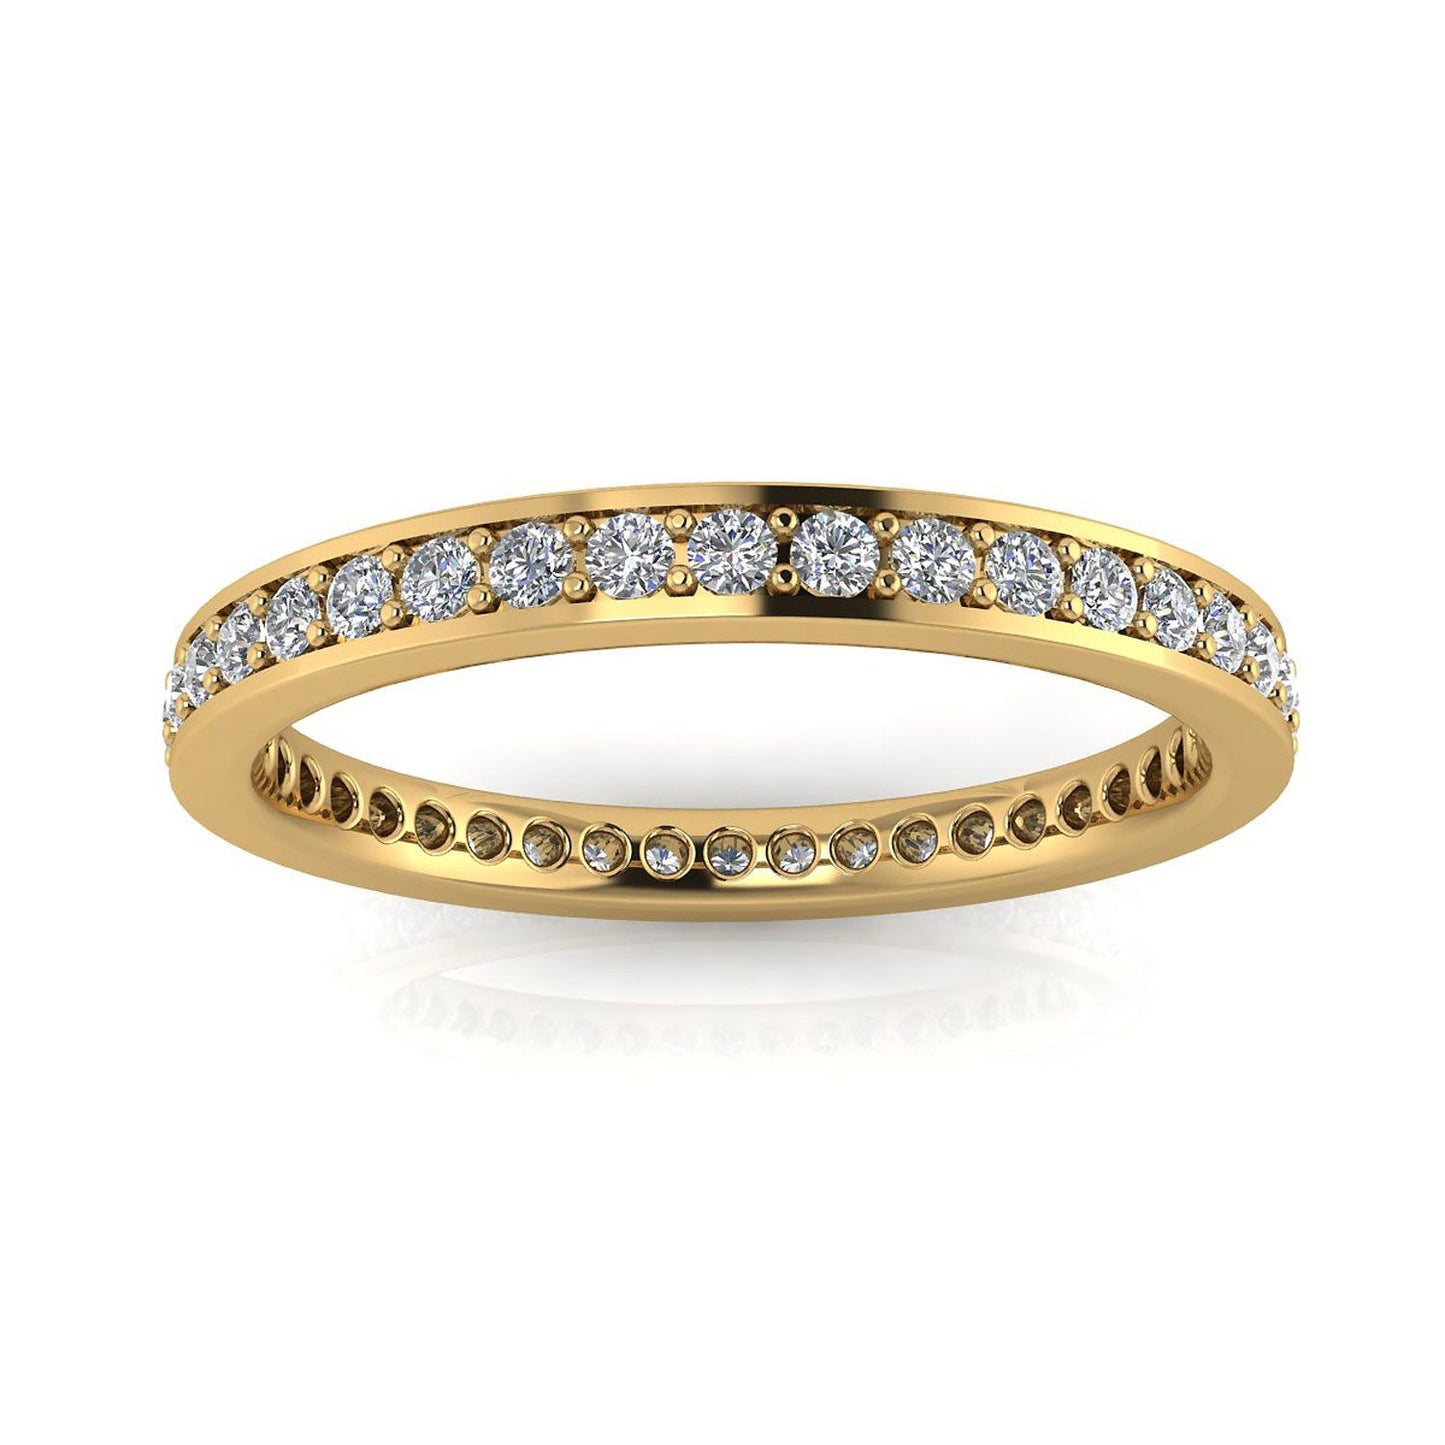 Round Brilliant Cut Diamond Channel Pave Set Eternity Ring In 18k Yellow Gold  (0.89ct. Tw.) Ring Size 5